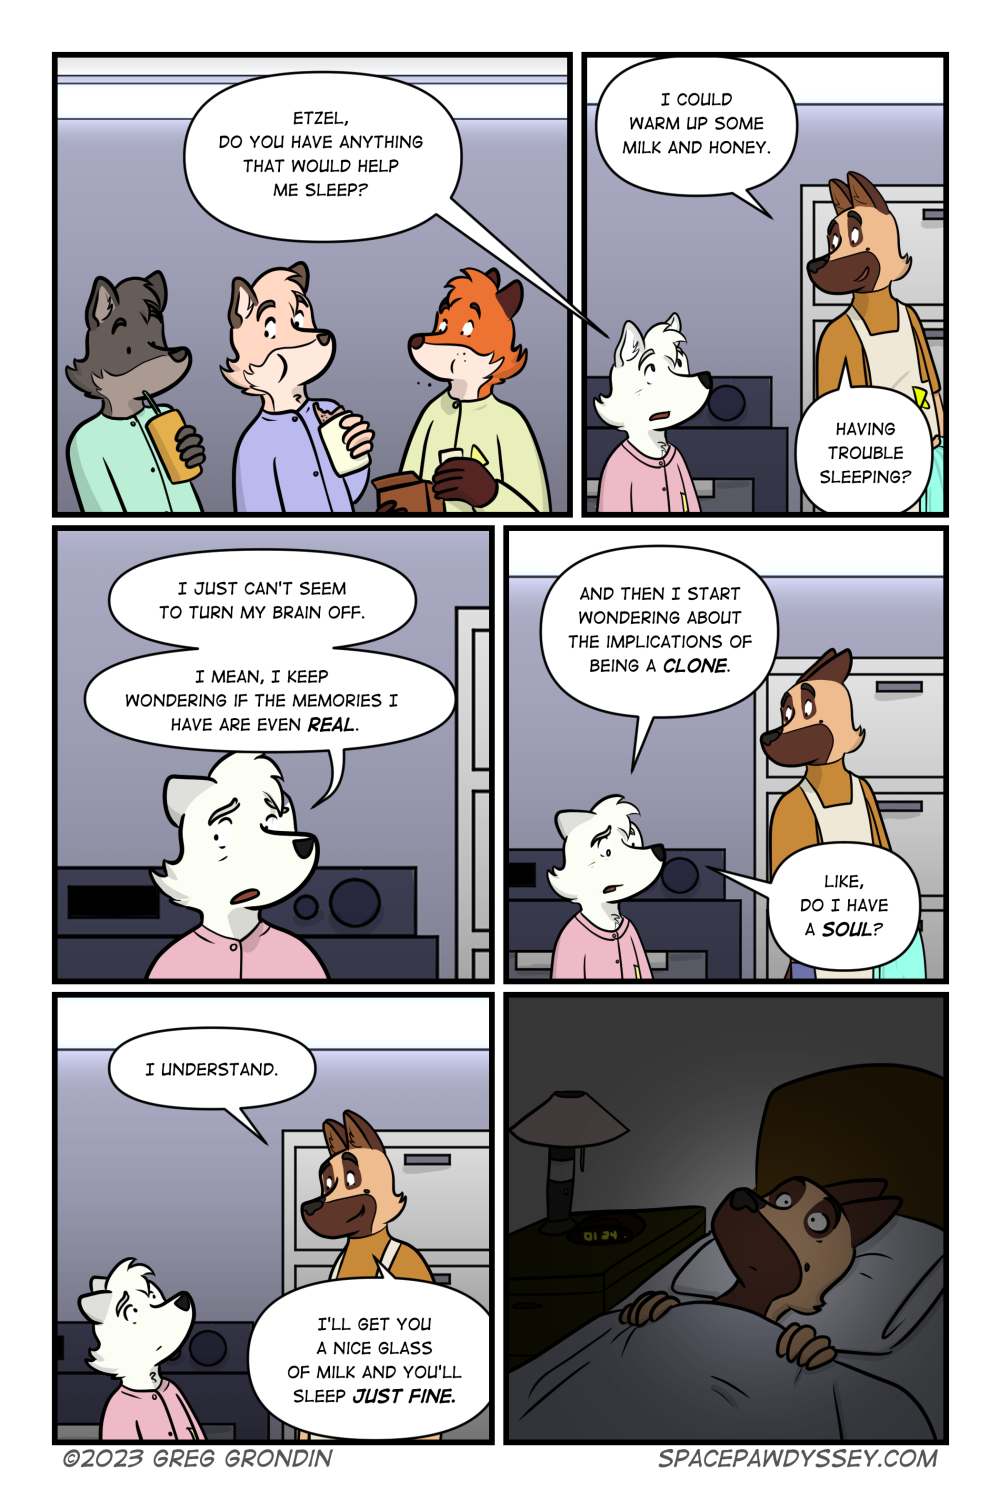 Space Pawdyssey #608